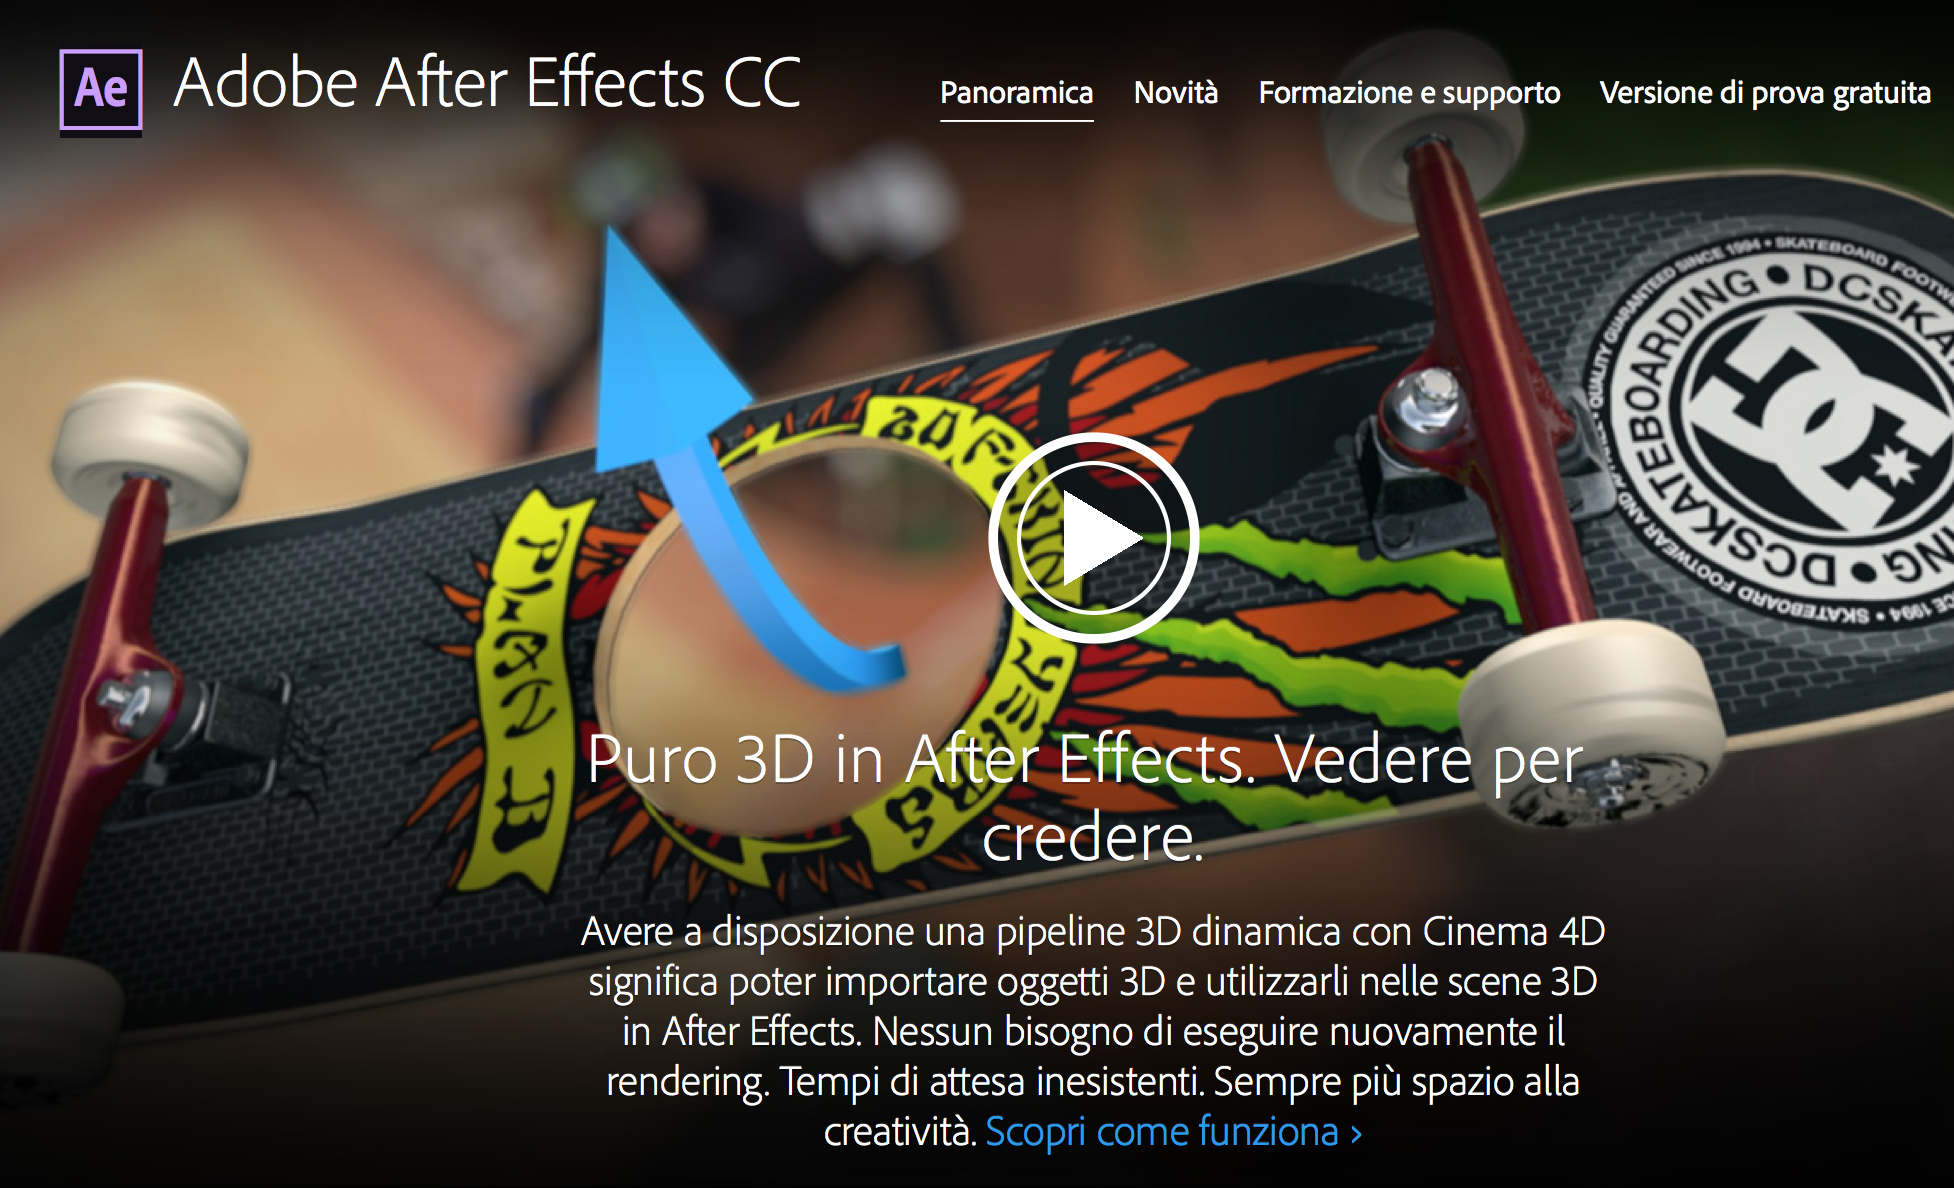 aftereffects